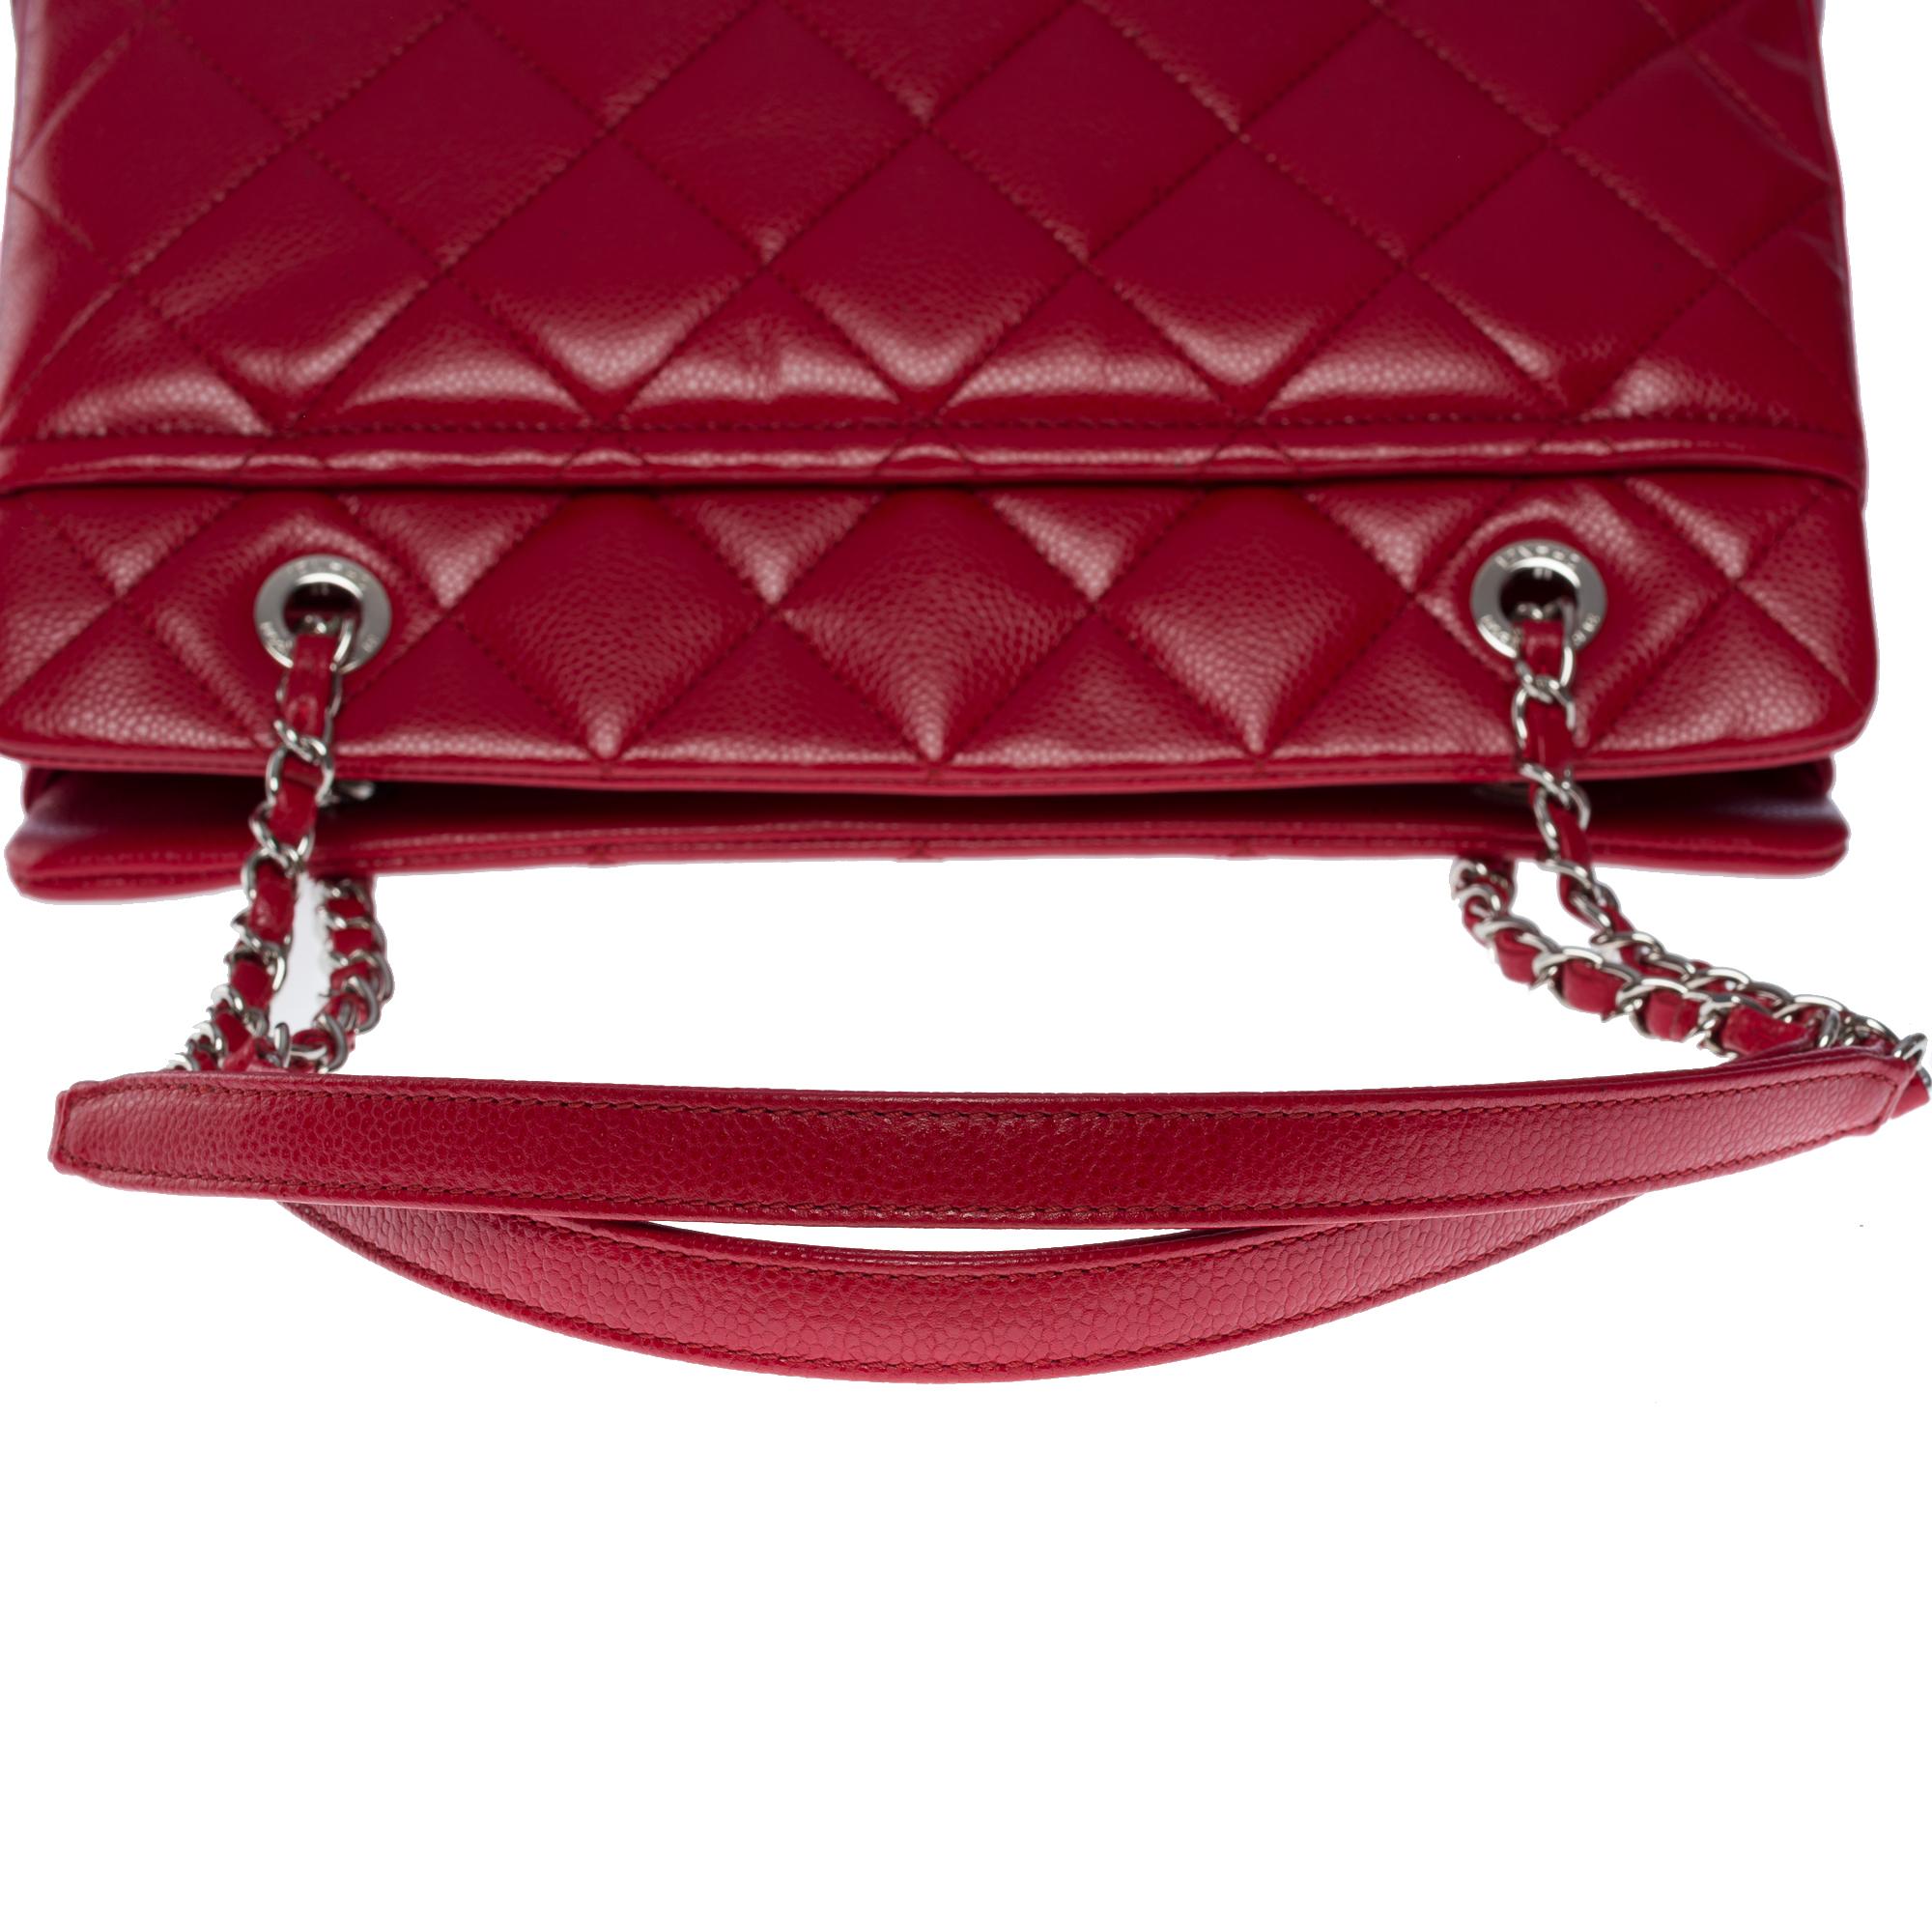 Bright & Amazing Chanel Shopping Tote bag in Red Caviar quilted leather, SHW For Sale 5